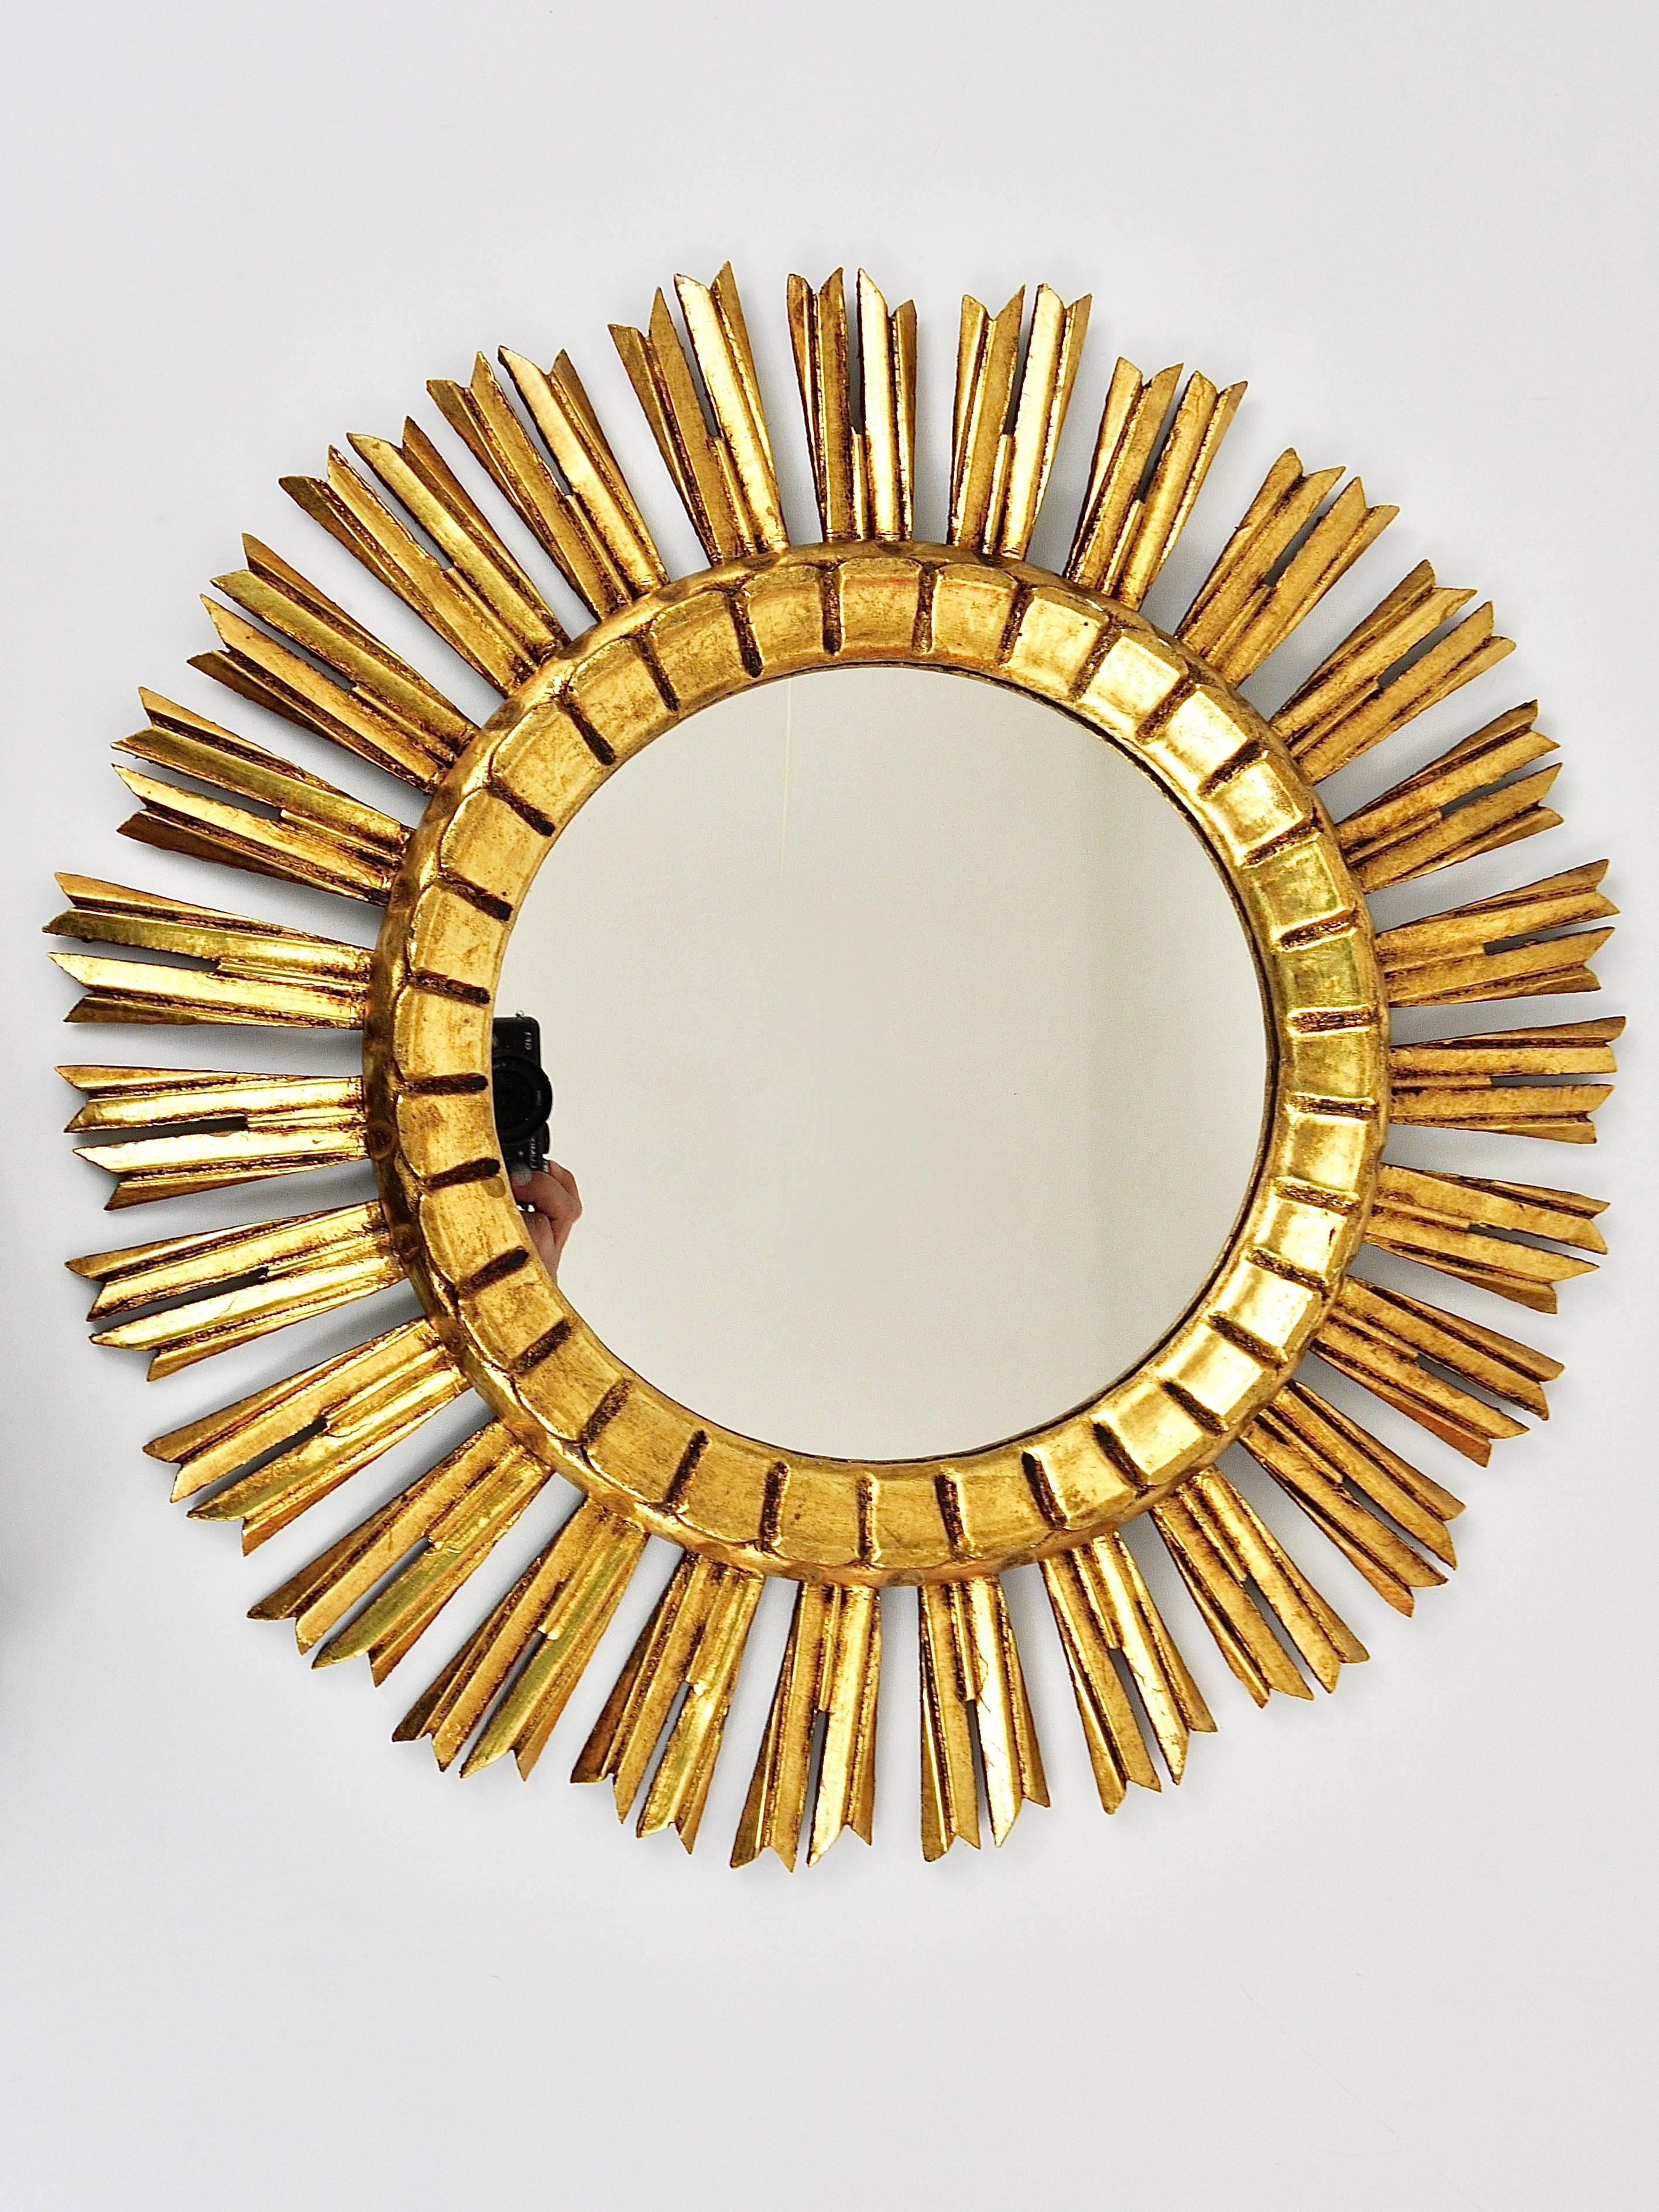 A beautiful and decorative sunburst/starburst gilt wall mirror from France, carved wood, dated around 1950. In very good condition. Diameter 20